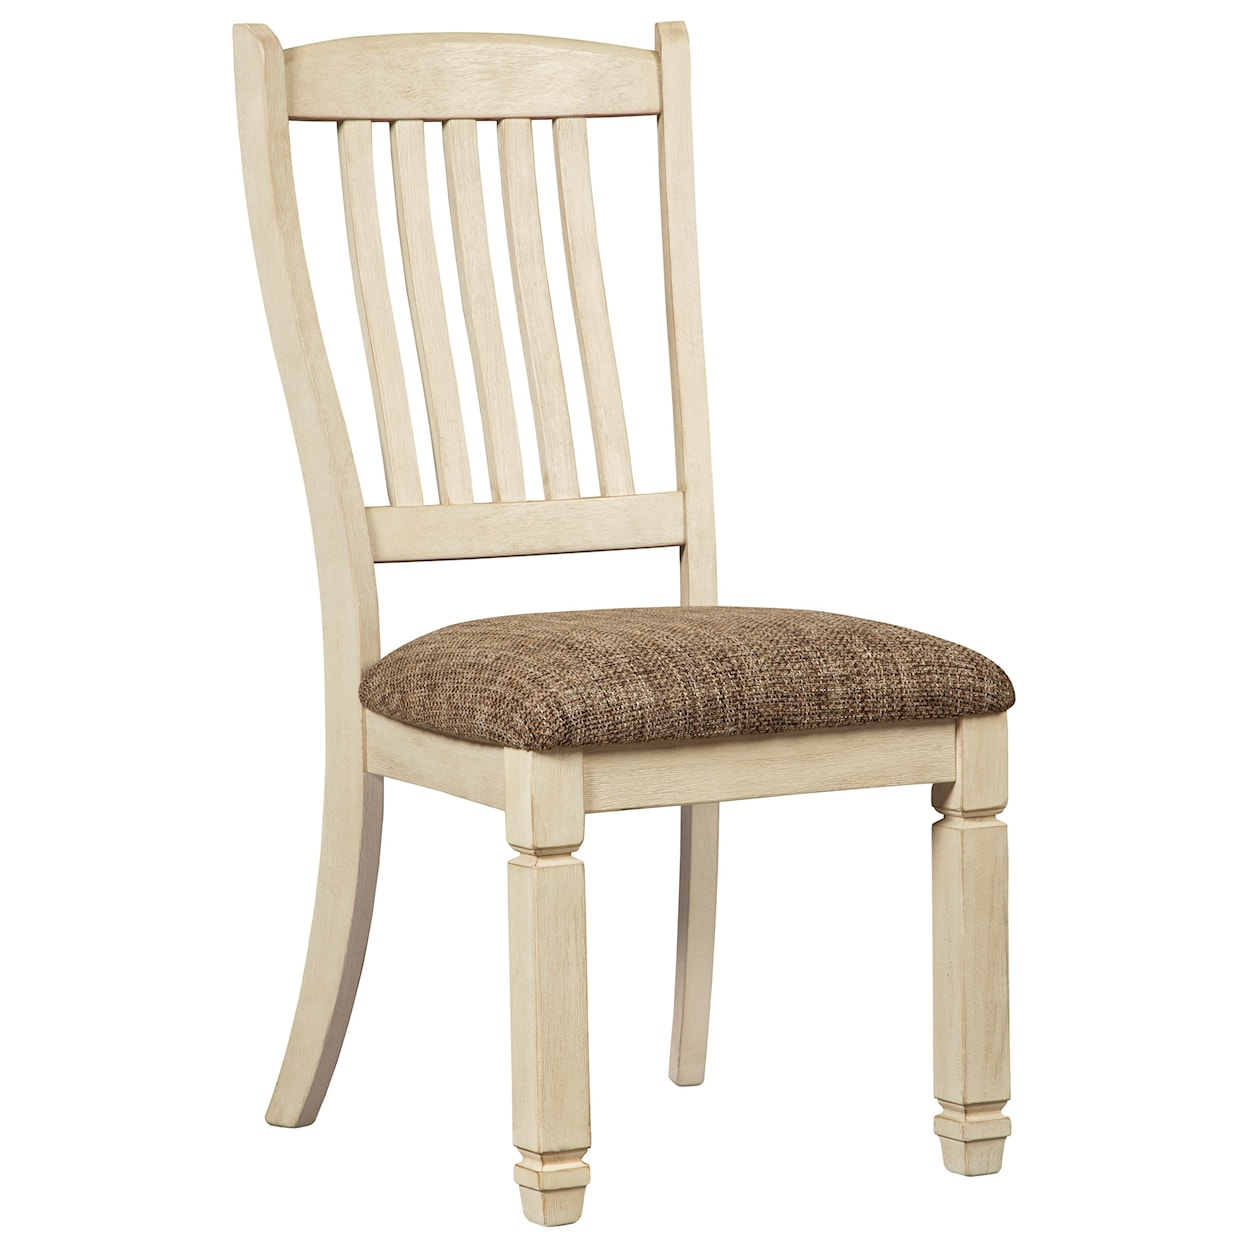 Signature Design by Ashley Bolanburg Upholstered Side Chair